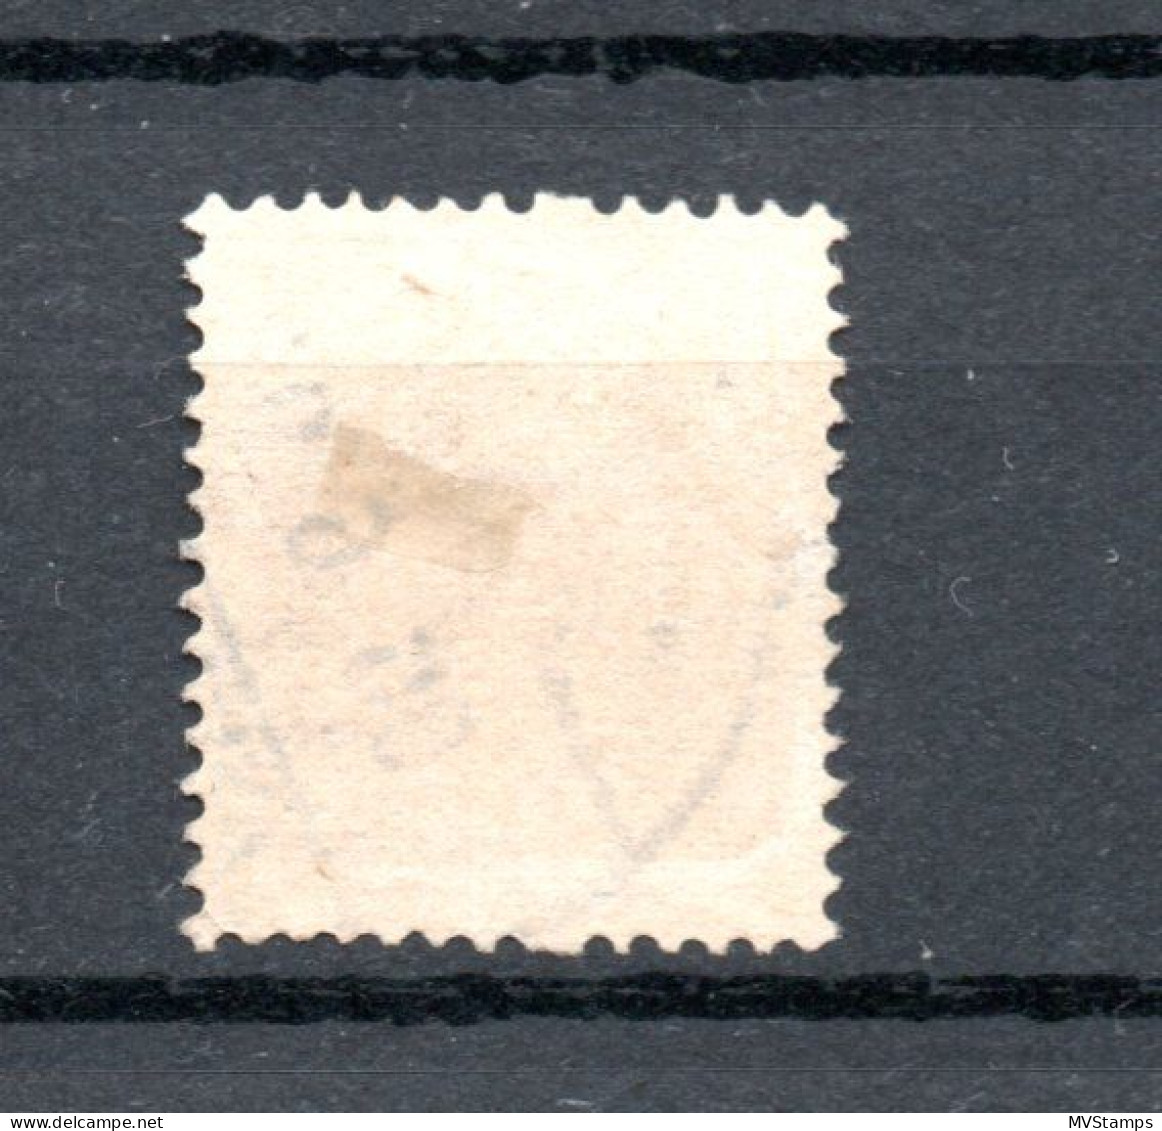 Iceland 1882 Old Posthorn Stamp (Michel 12 A), Misperforation Used - Used Stamps